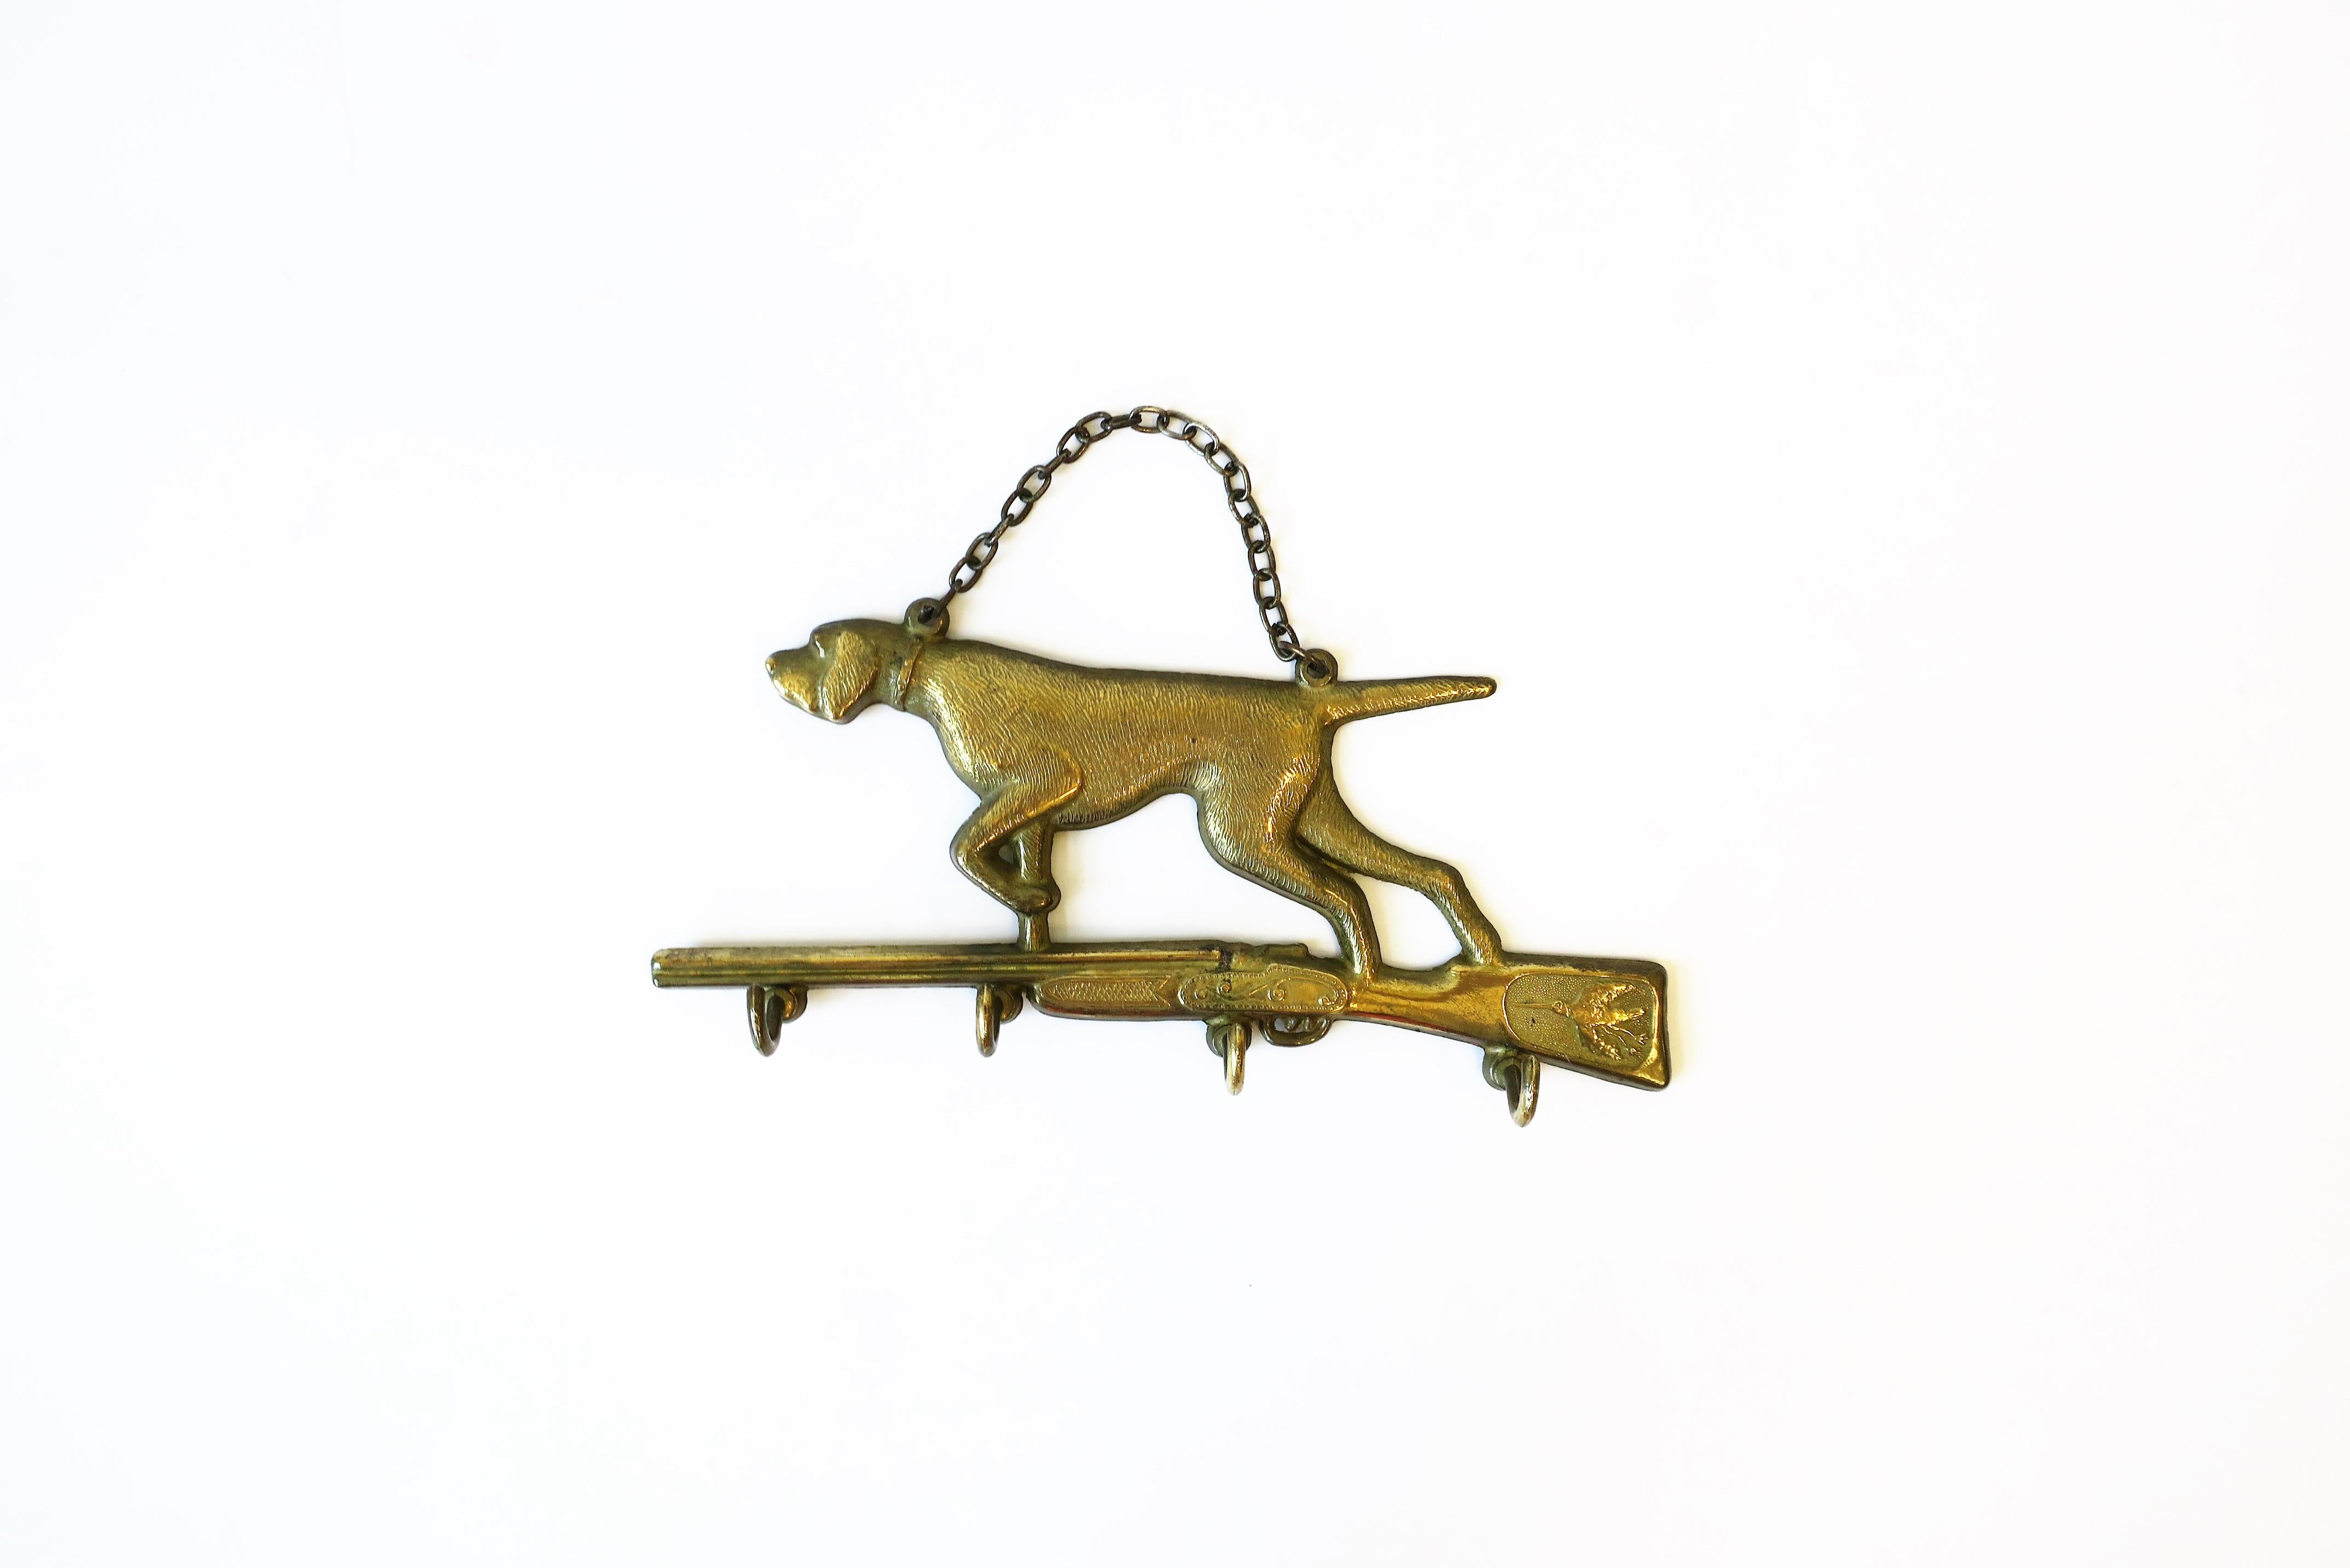 A great Italian brass hunting dog and rifle wall key hook holder, circa early to mid-20th century, Italy. Piece features a bloodhound hunting dog atop a rifle gun. Gun with pheasant bird detail. Below gun there are four (4) hooks for keys or other